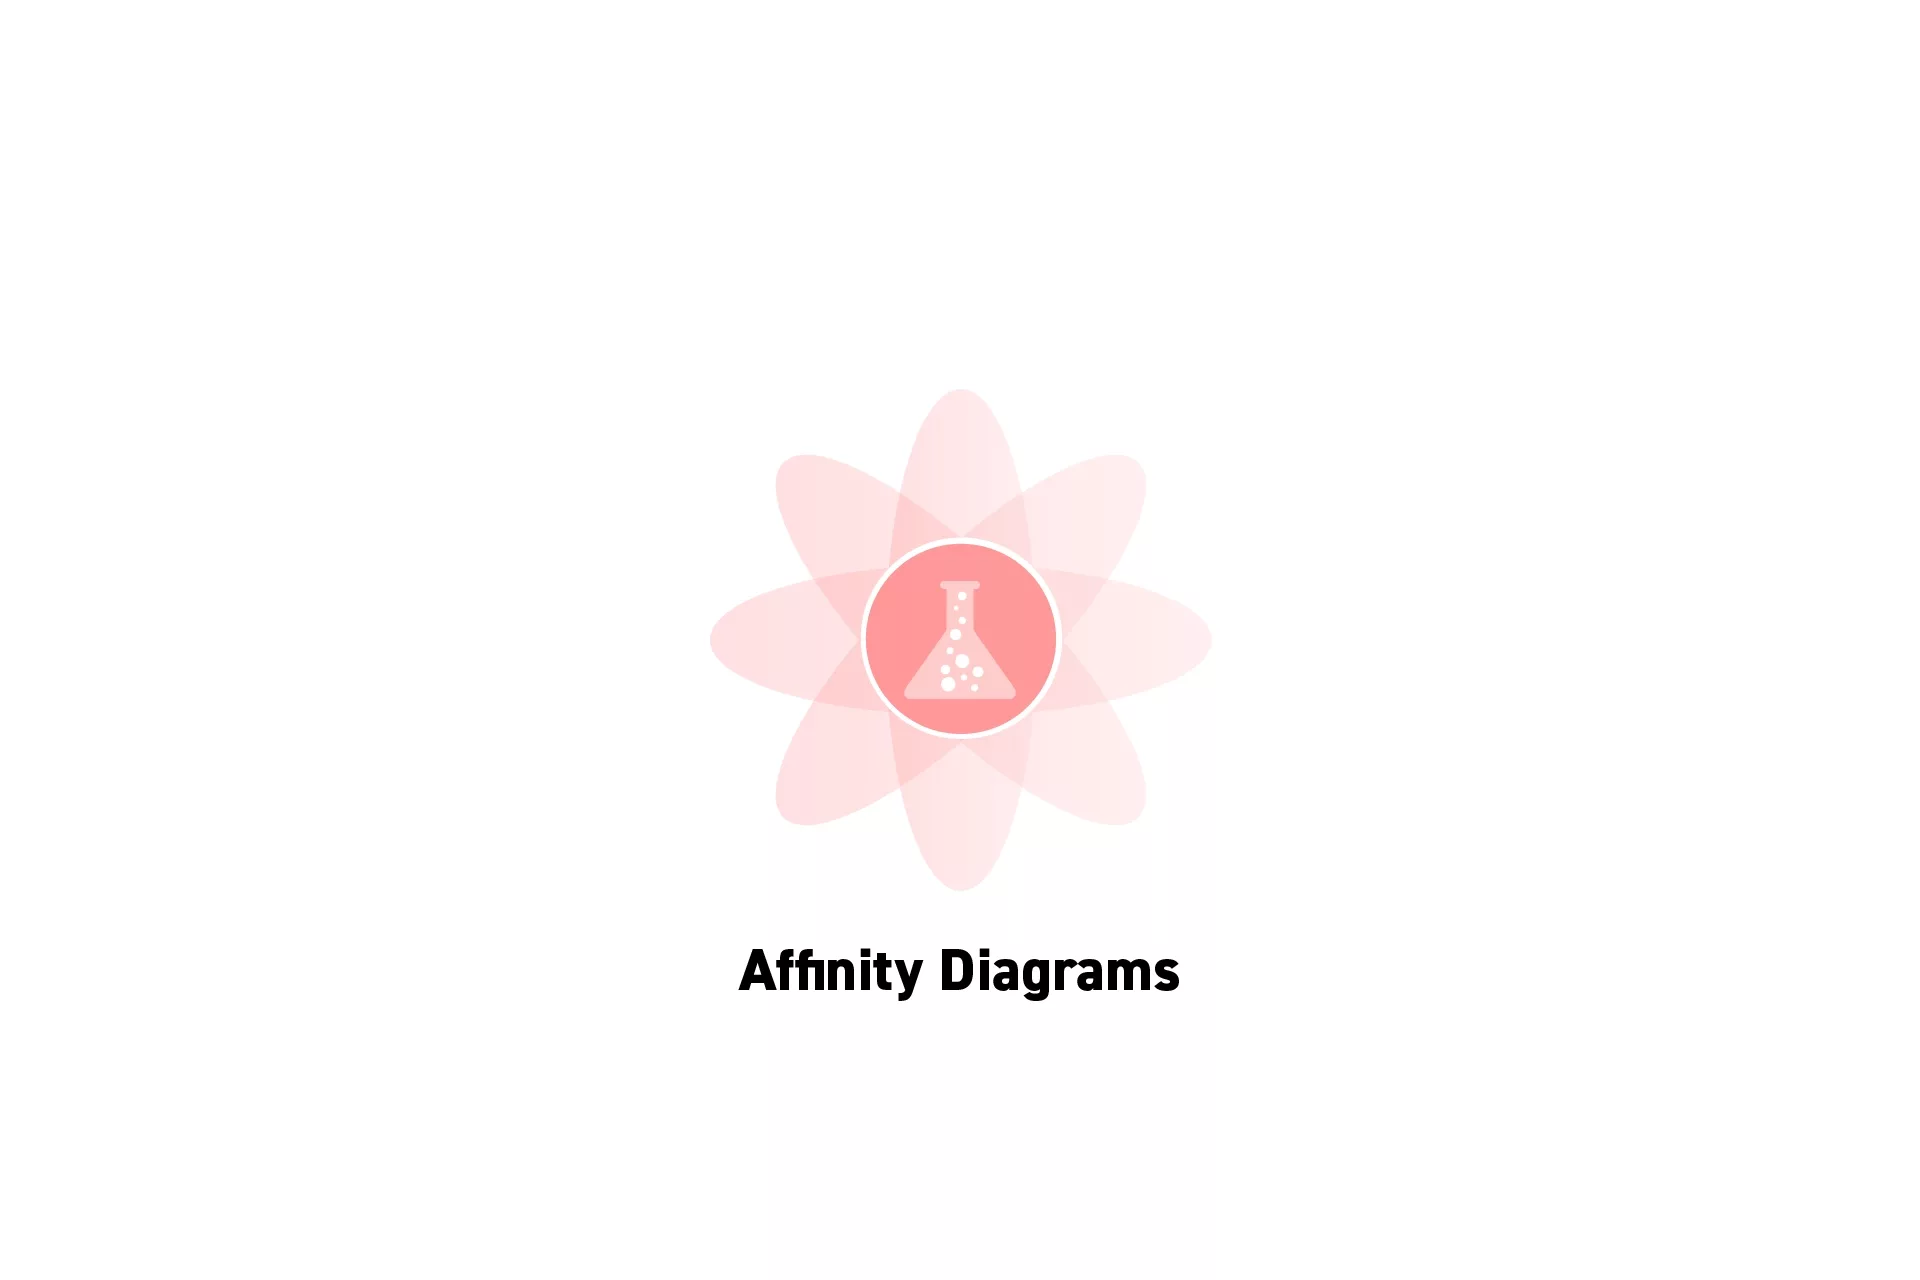 A flower that represents Strategy with the text "Affinity Diagrams" beneath it.